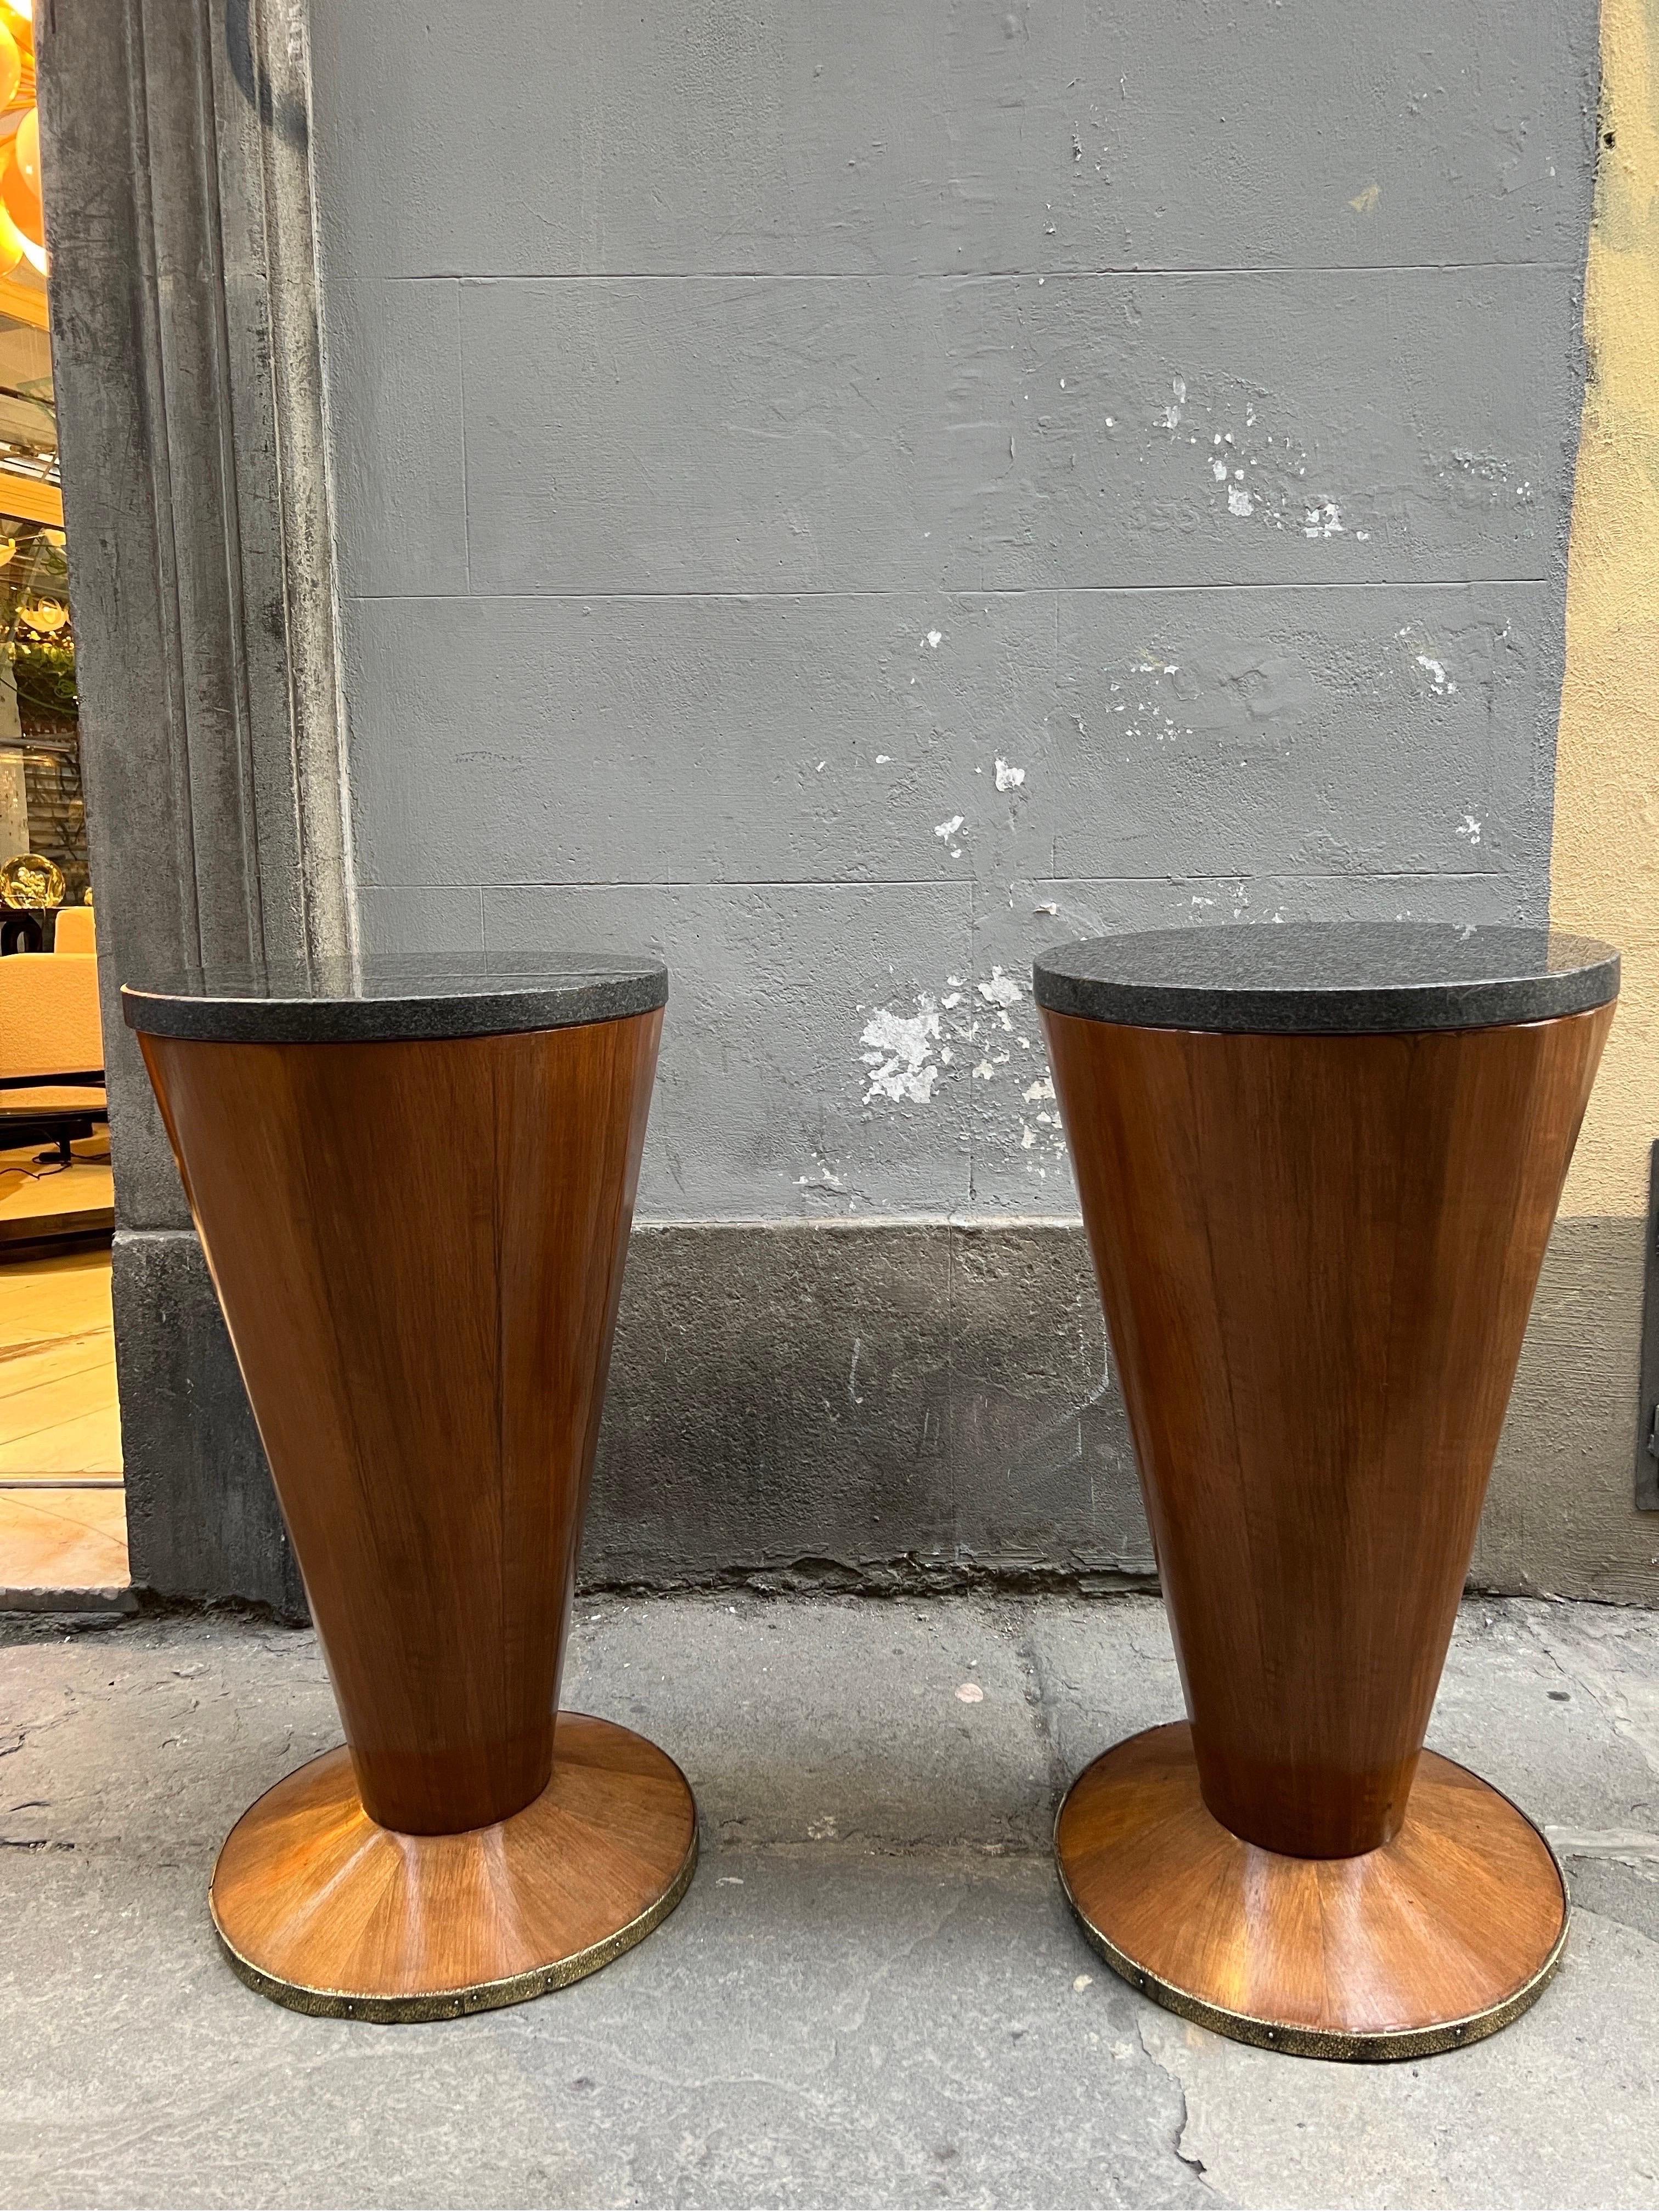 Pair of Art Deco Conical Cherry Wood Side Tables with Marble Top 1940s For Sale 1